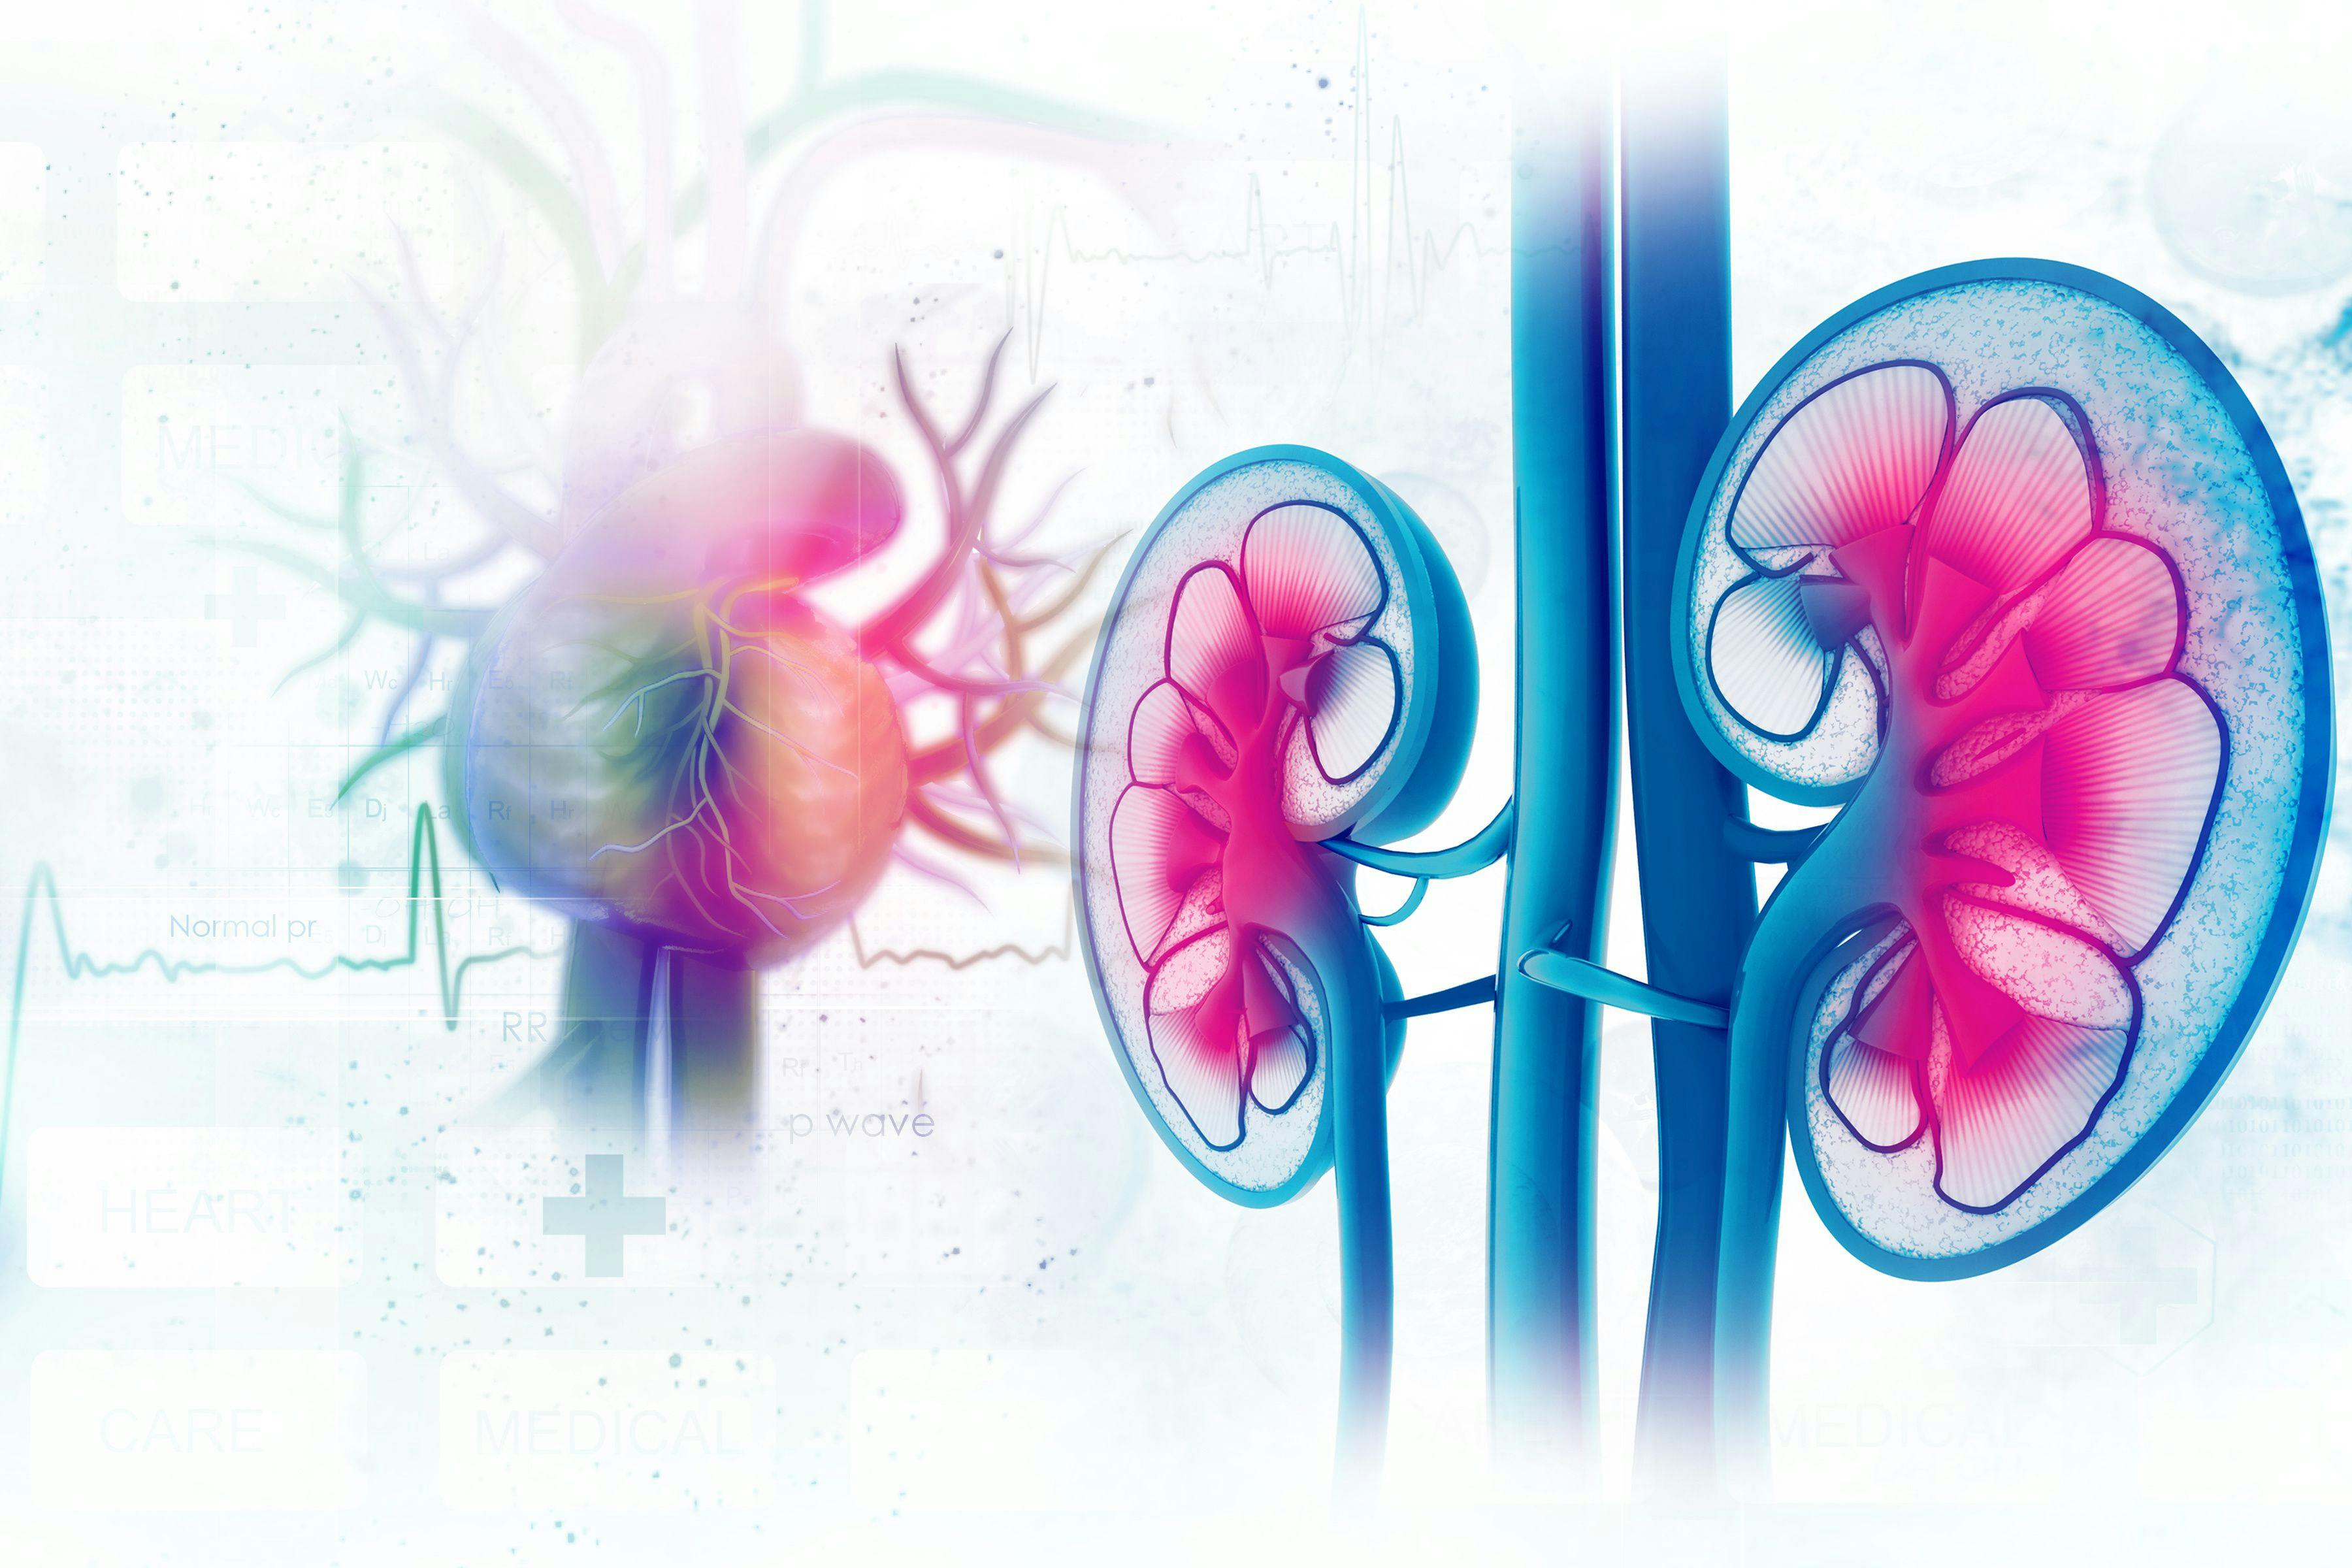 Patients with VHL-mutant and wild type clear cell renal cell carcinoma may have comparable clinical characteristics, although other genetic alterations may be at play.